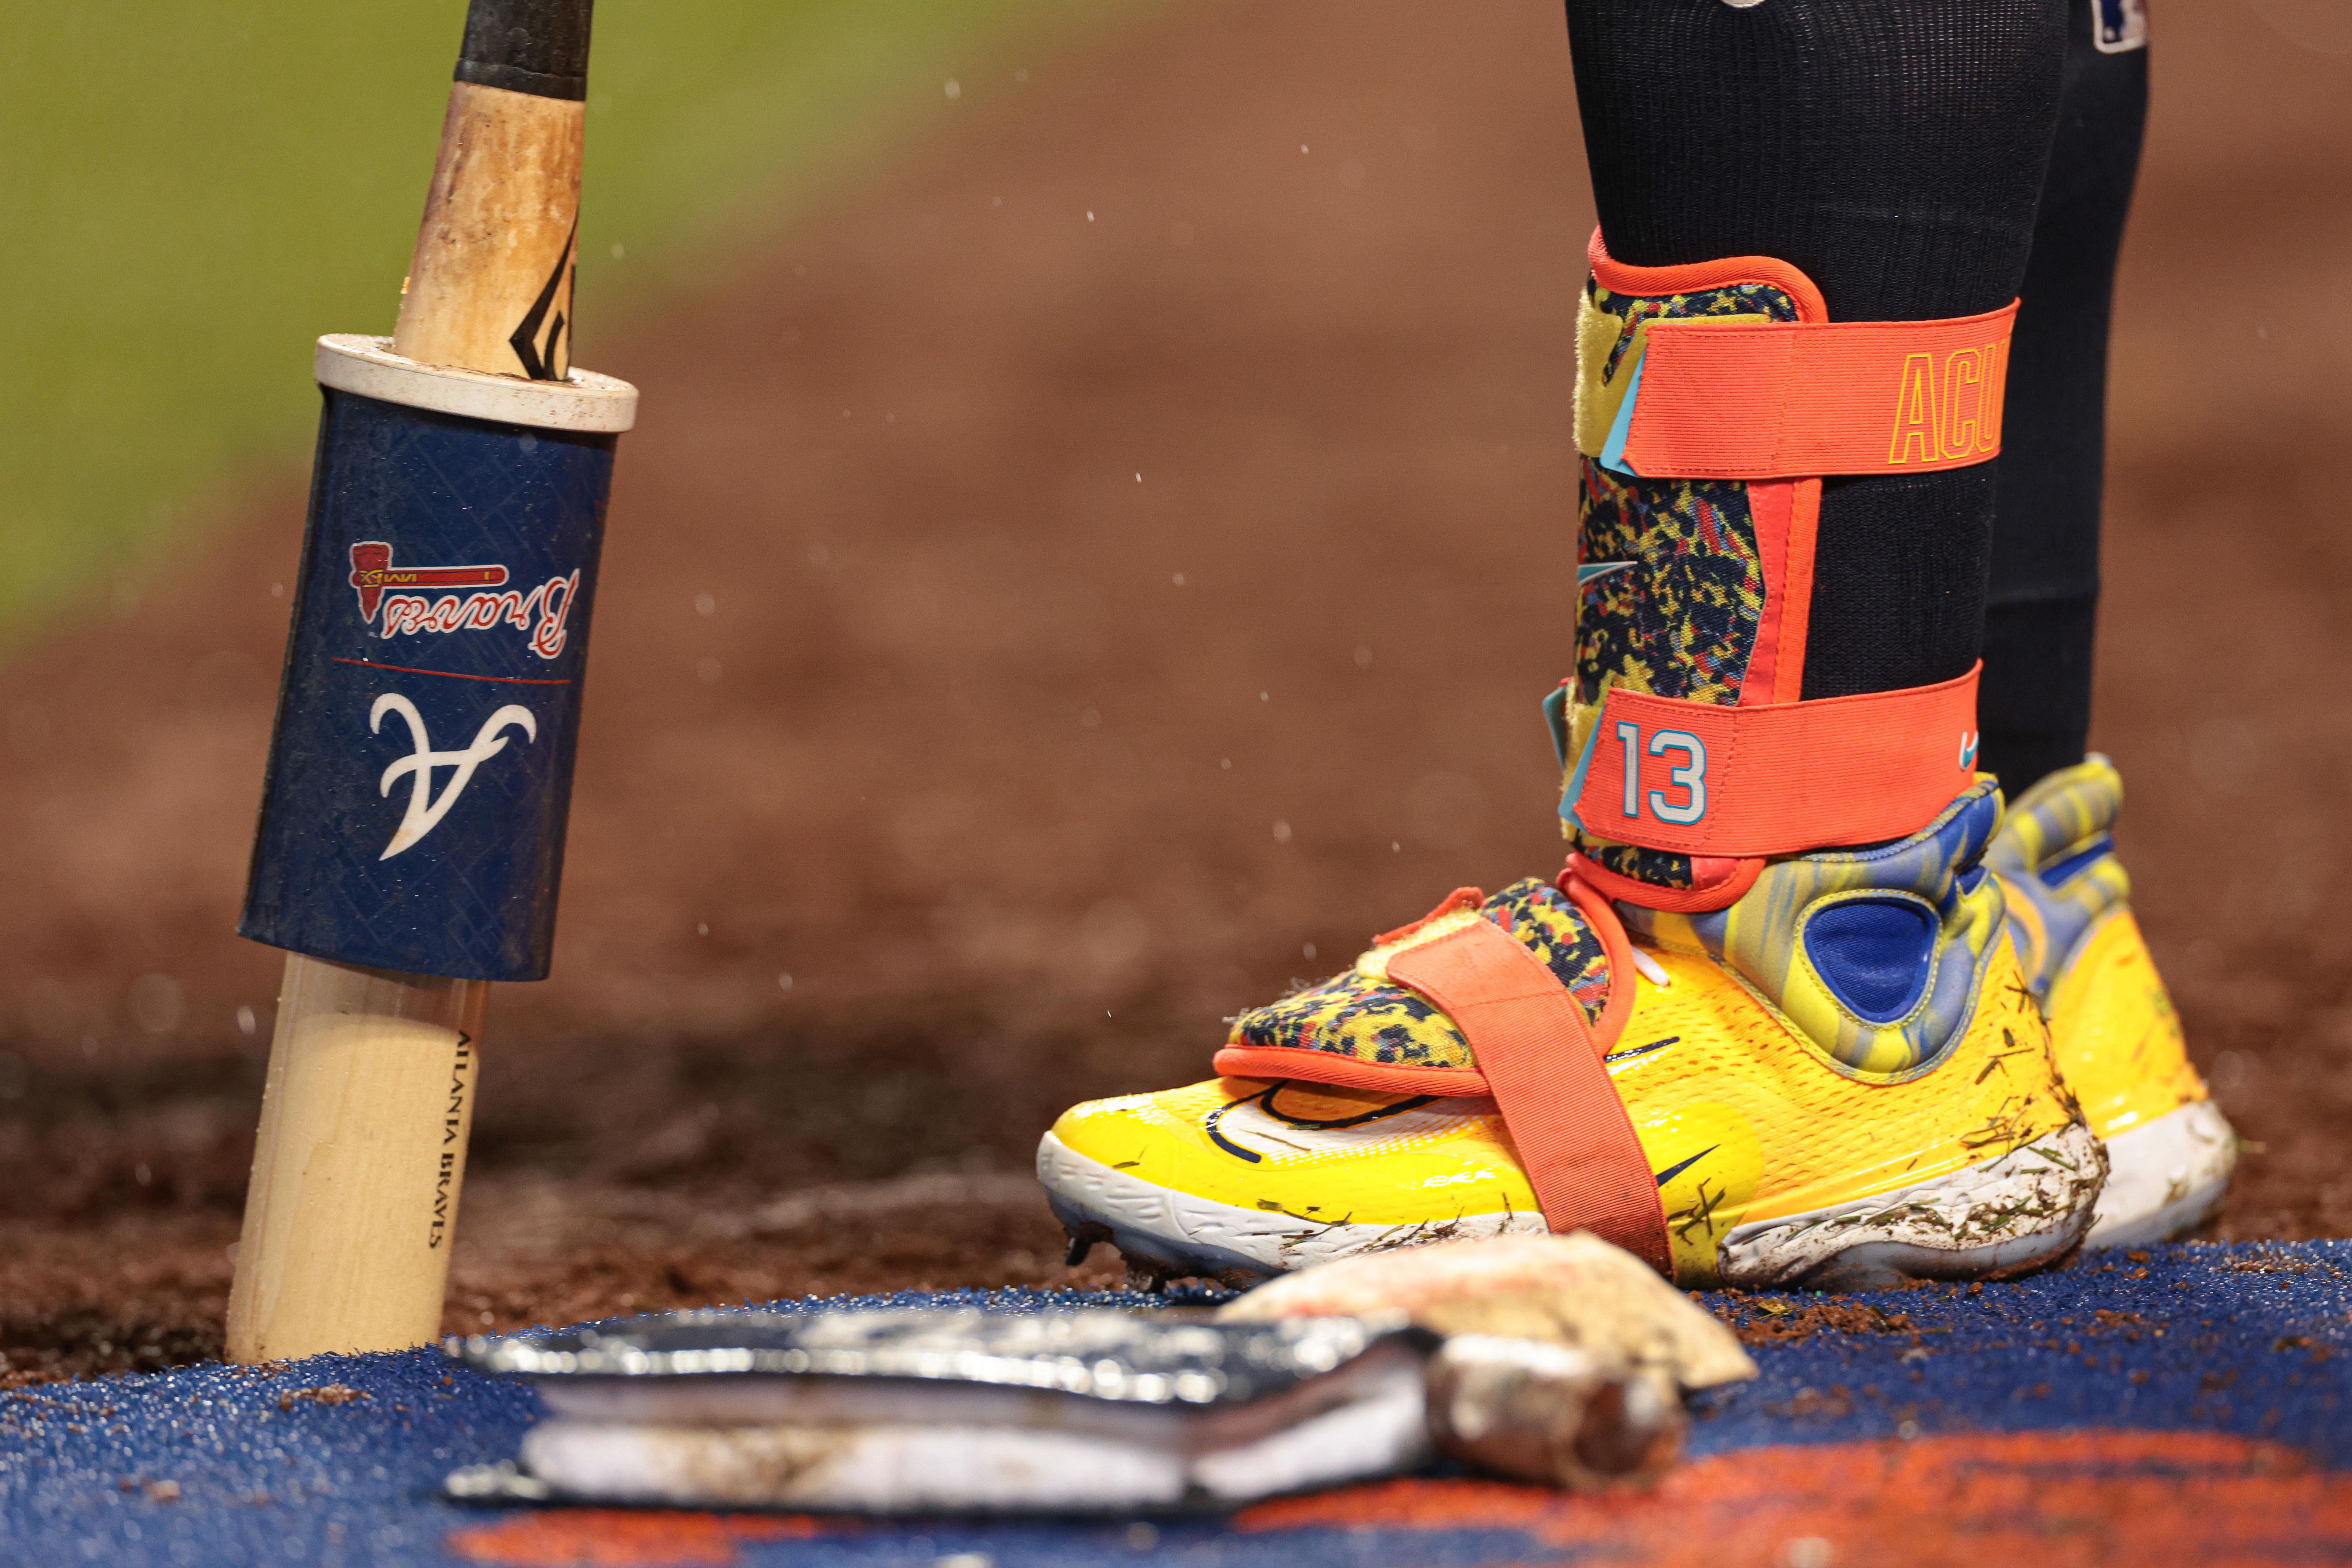 Atlanta Braves outfielder Ronald Acuna Jr.'s yellow Nike cleats.